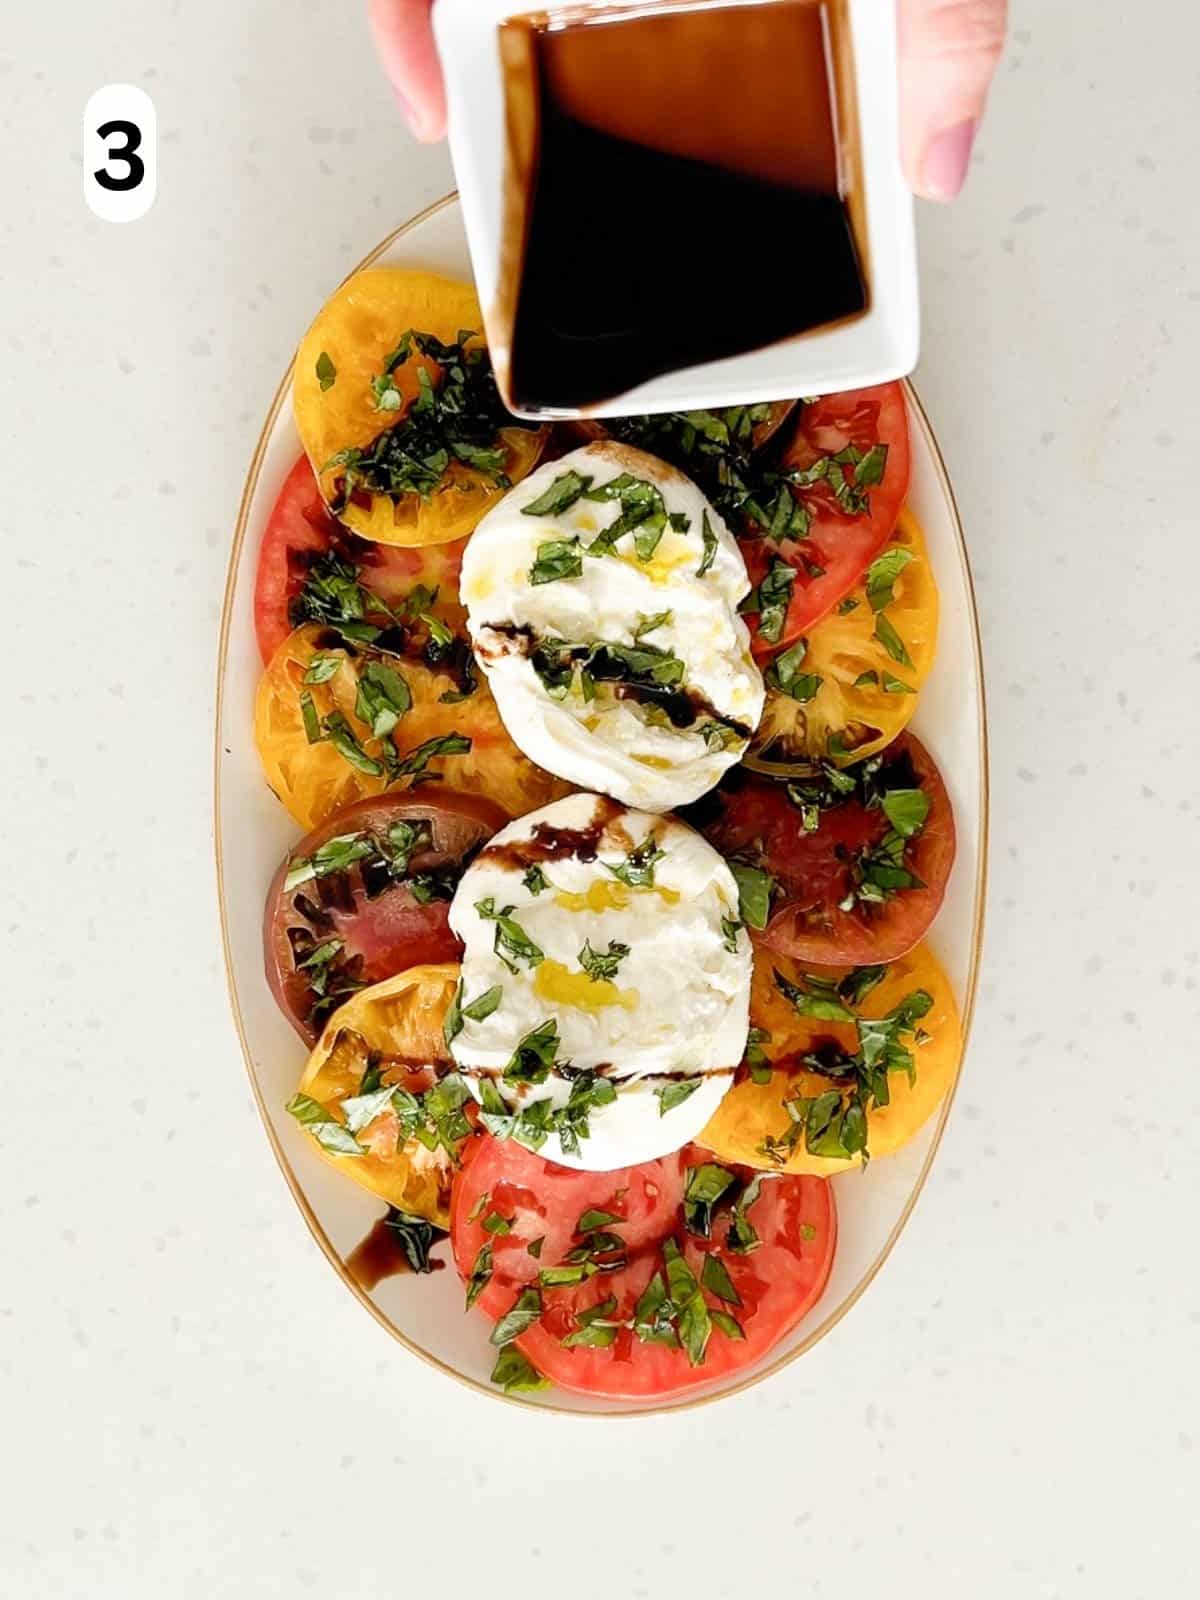 Balsamic vinegar is drizzled on top of the tomatoes and burrata.